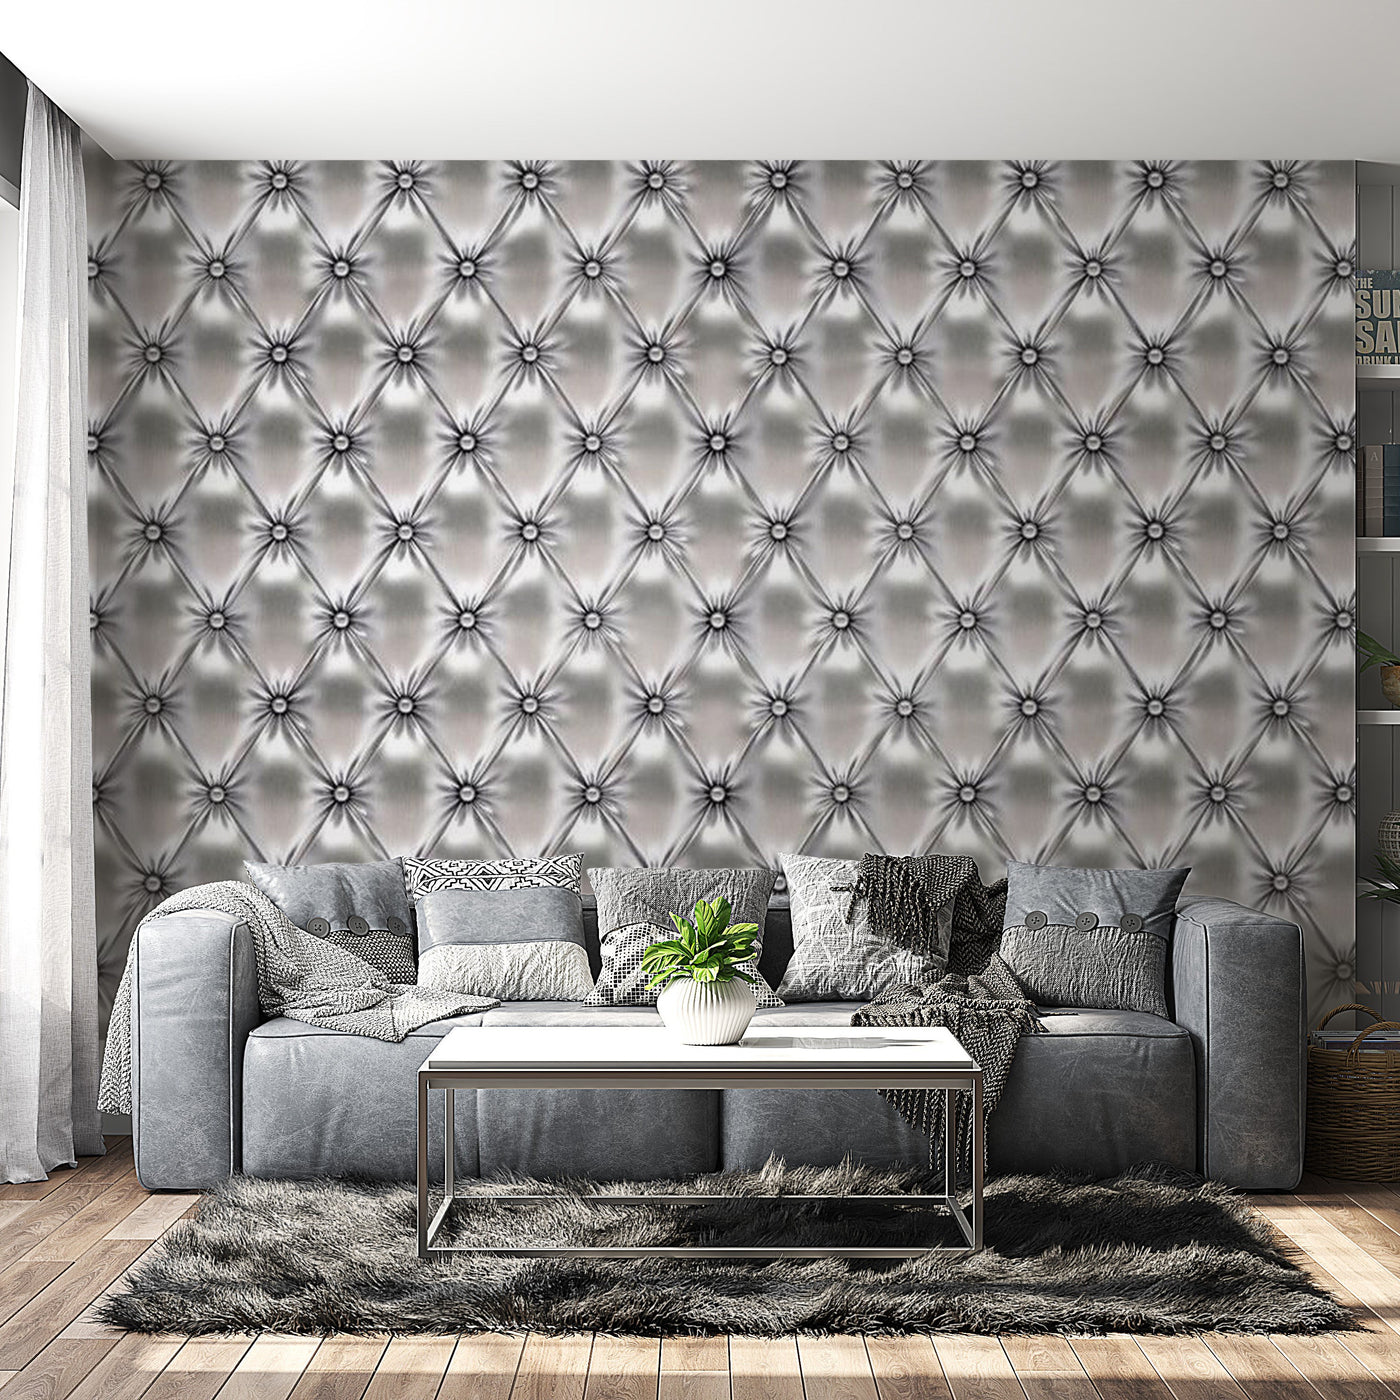 Peel & Stick Wall Mural - Silver Chesterfield Pattern - Removable Wall Decals